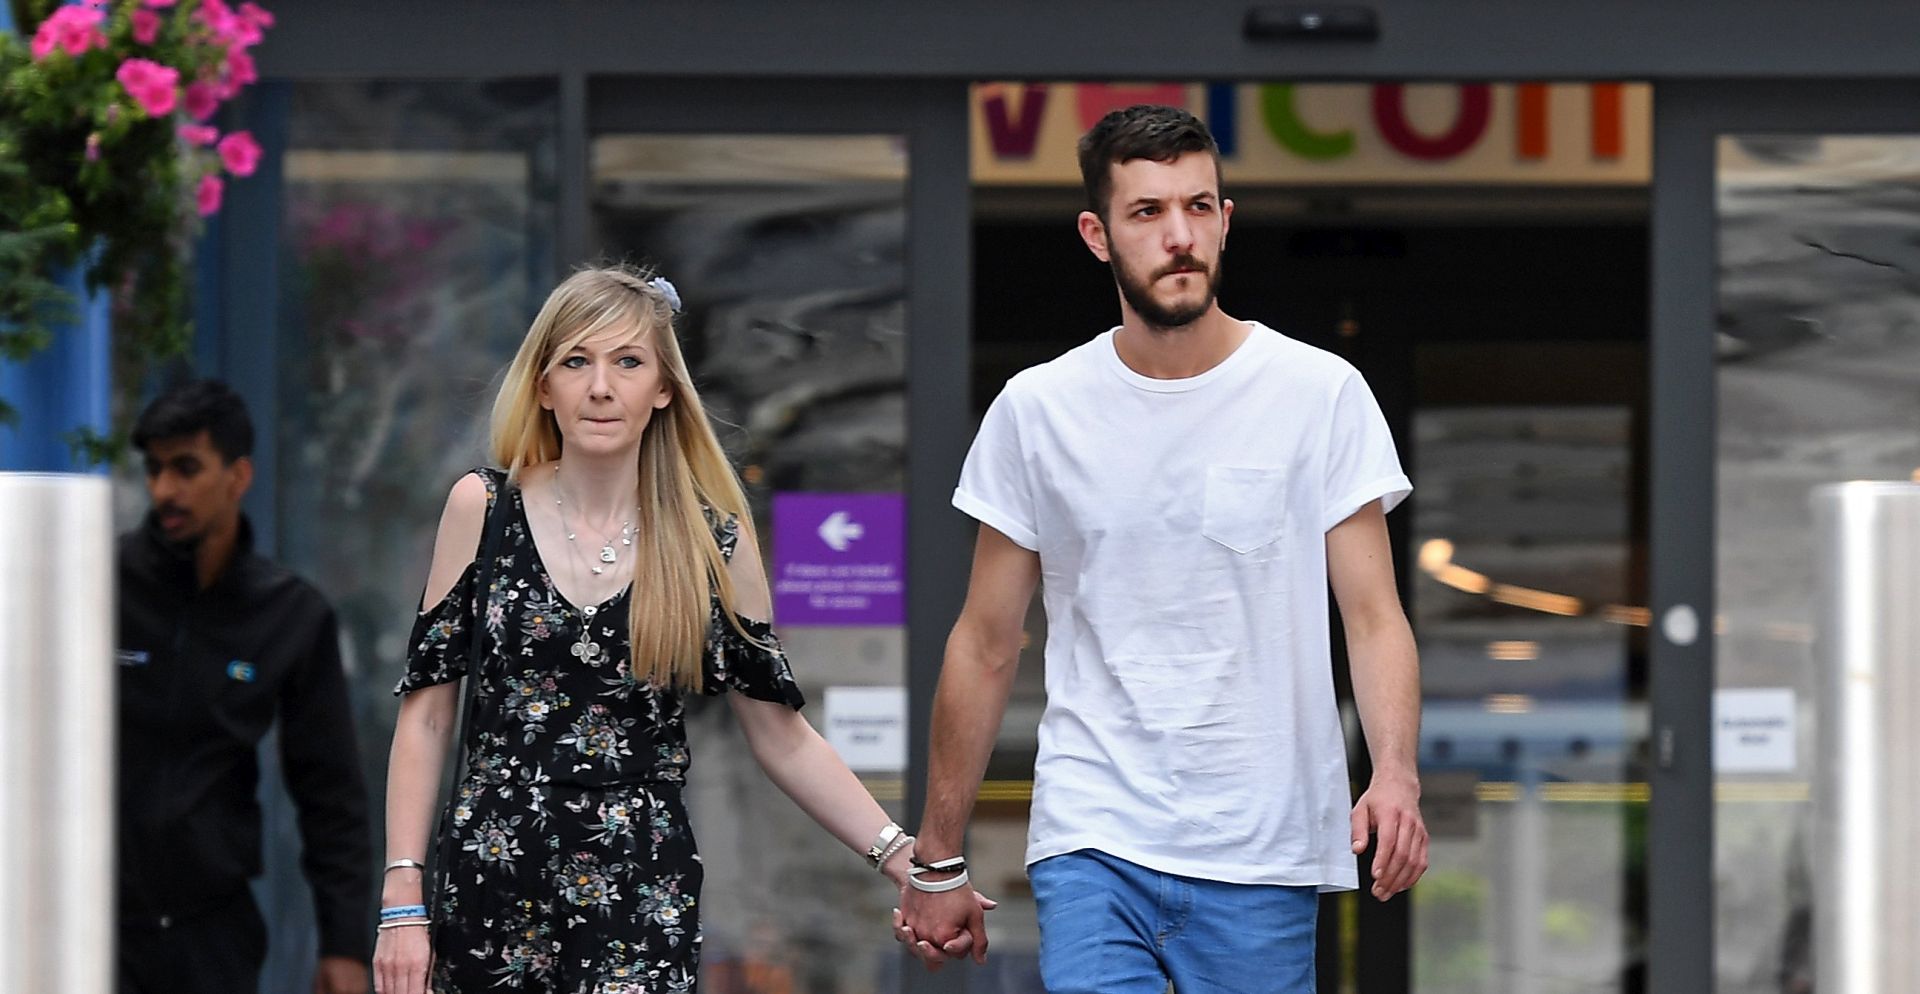 epa06077841 Parents of Charlie Gard, Connie Yates (L) and Chris Gard (R) depart Great Ormond Street Hospital in London, Britain, 09 July 2017.  Connie Yates and Chris Gard delivered a petition to Great Ormond Street Hospital calling for Charlie to be allowed to travel and to receive treatment in the US. The terminally ill 11-months-old baby Charlie Gard suffers from a rare mitochondrial disease and the hospital previously won an order to say his life support should be turned off while the boy's parents keep fighting for potentially live-saving treatment.  EPA/ANDY RAIN